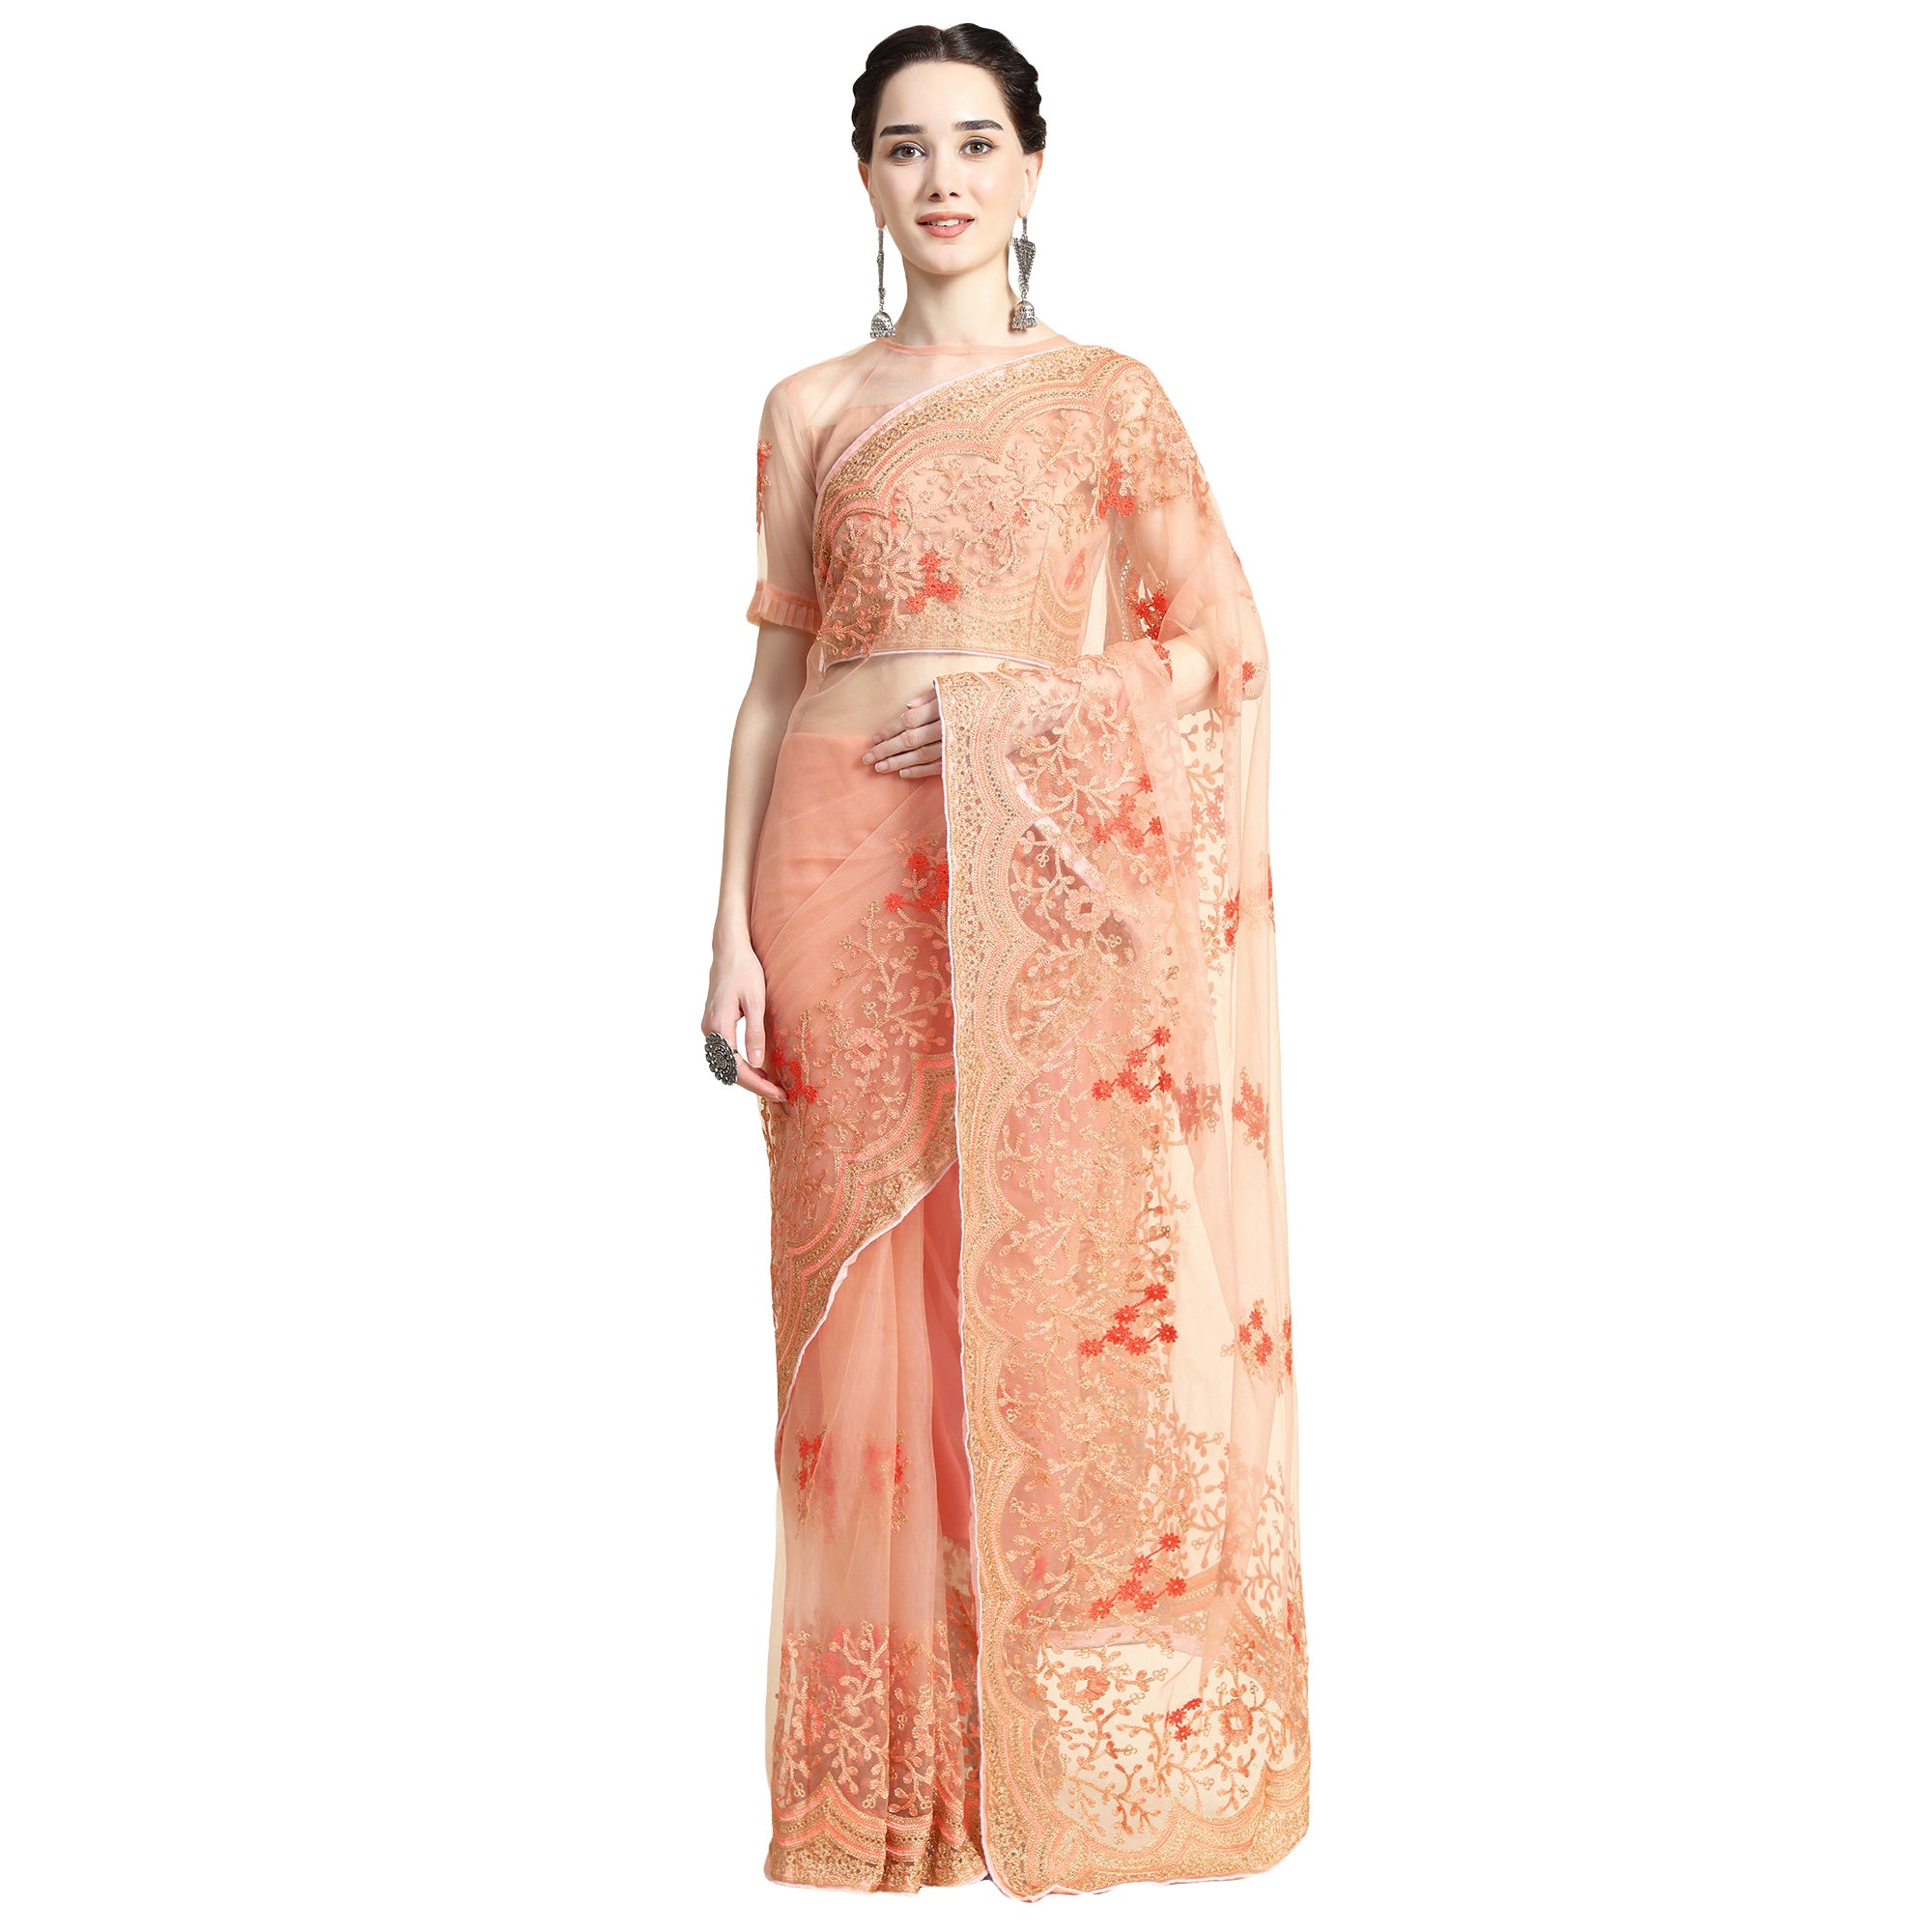 Women's Self Color Thread Embroidery Paty Wear Contemporary Net Saree With Blouse Piece (Orange) - NIMIDHYA